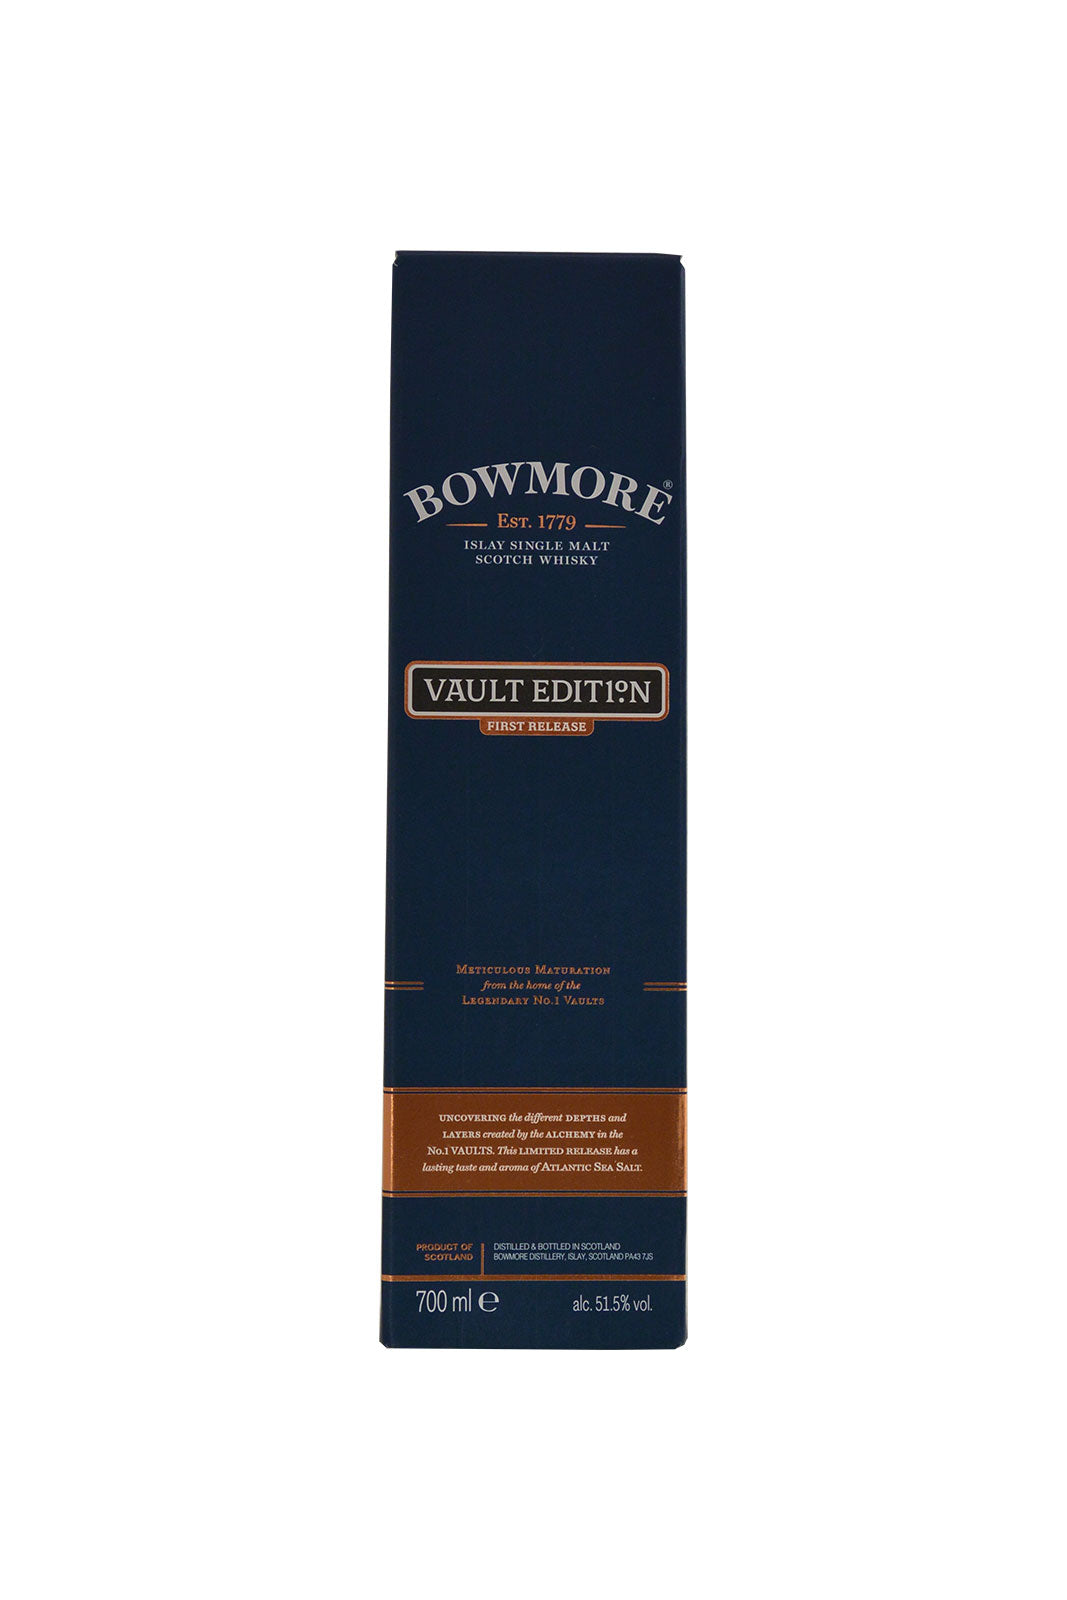 Bowmore Vault Edition (First Release)